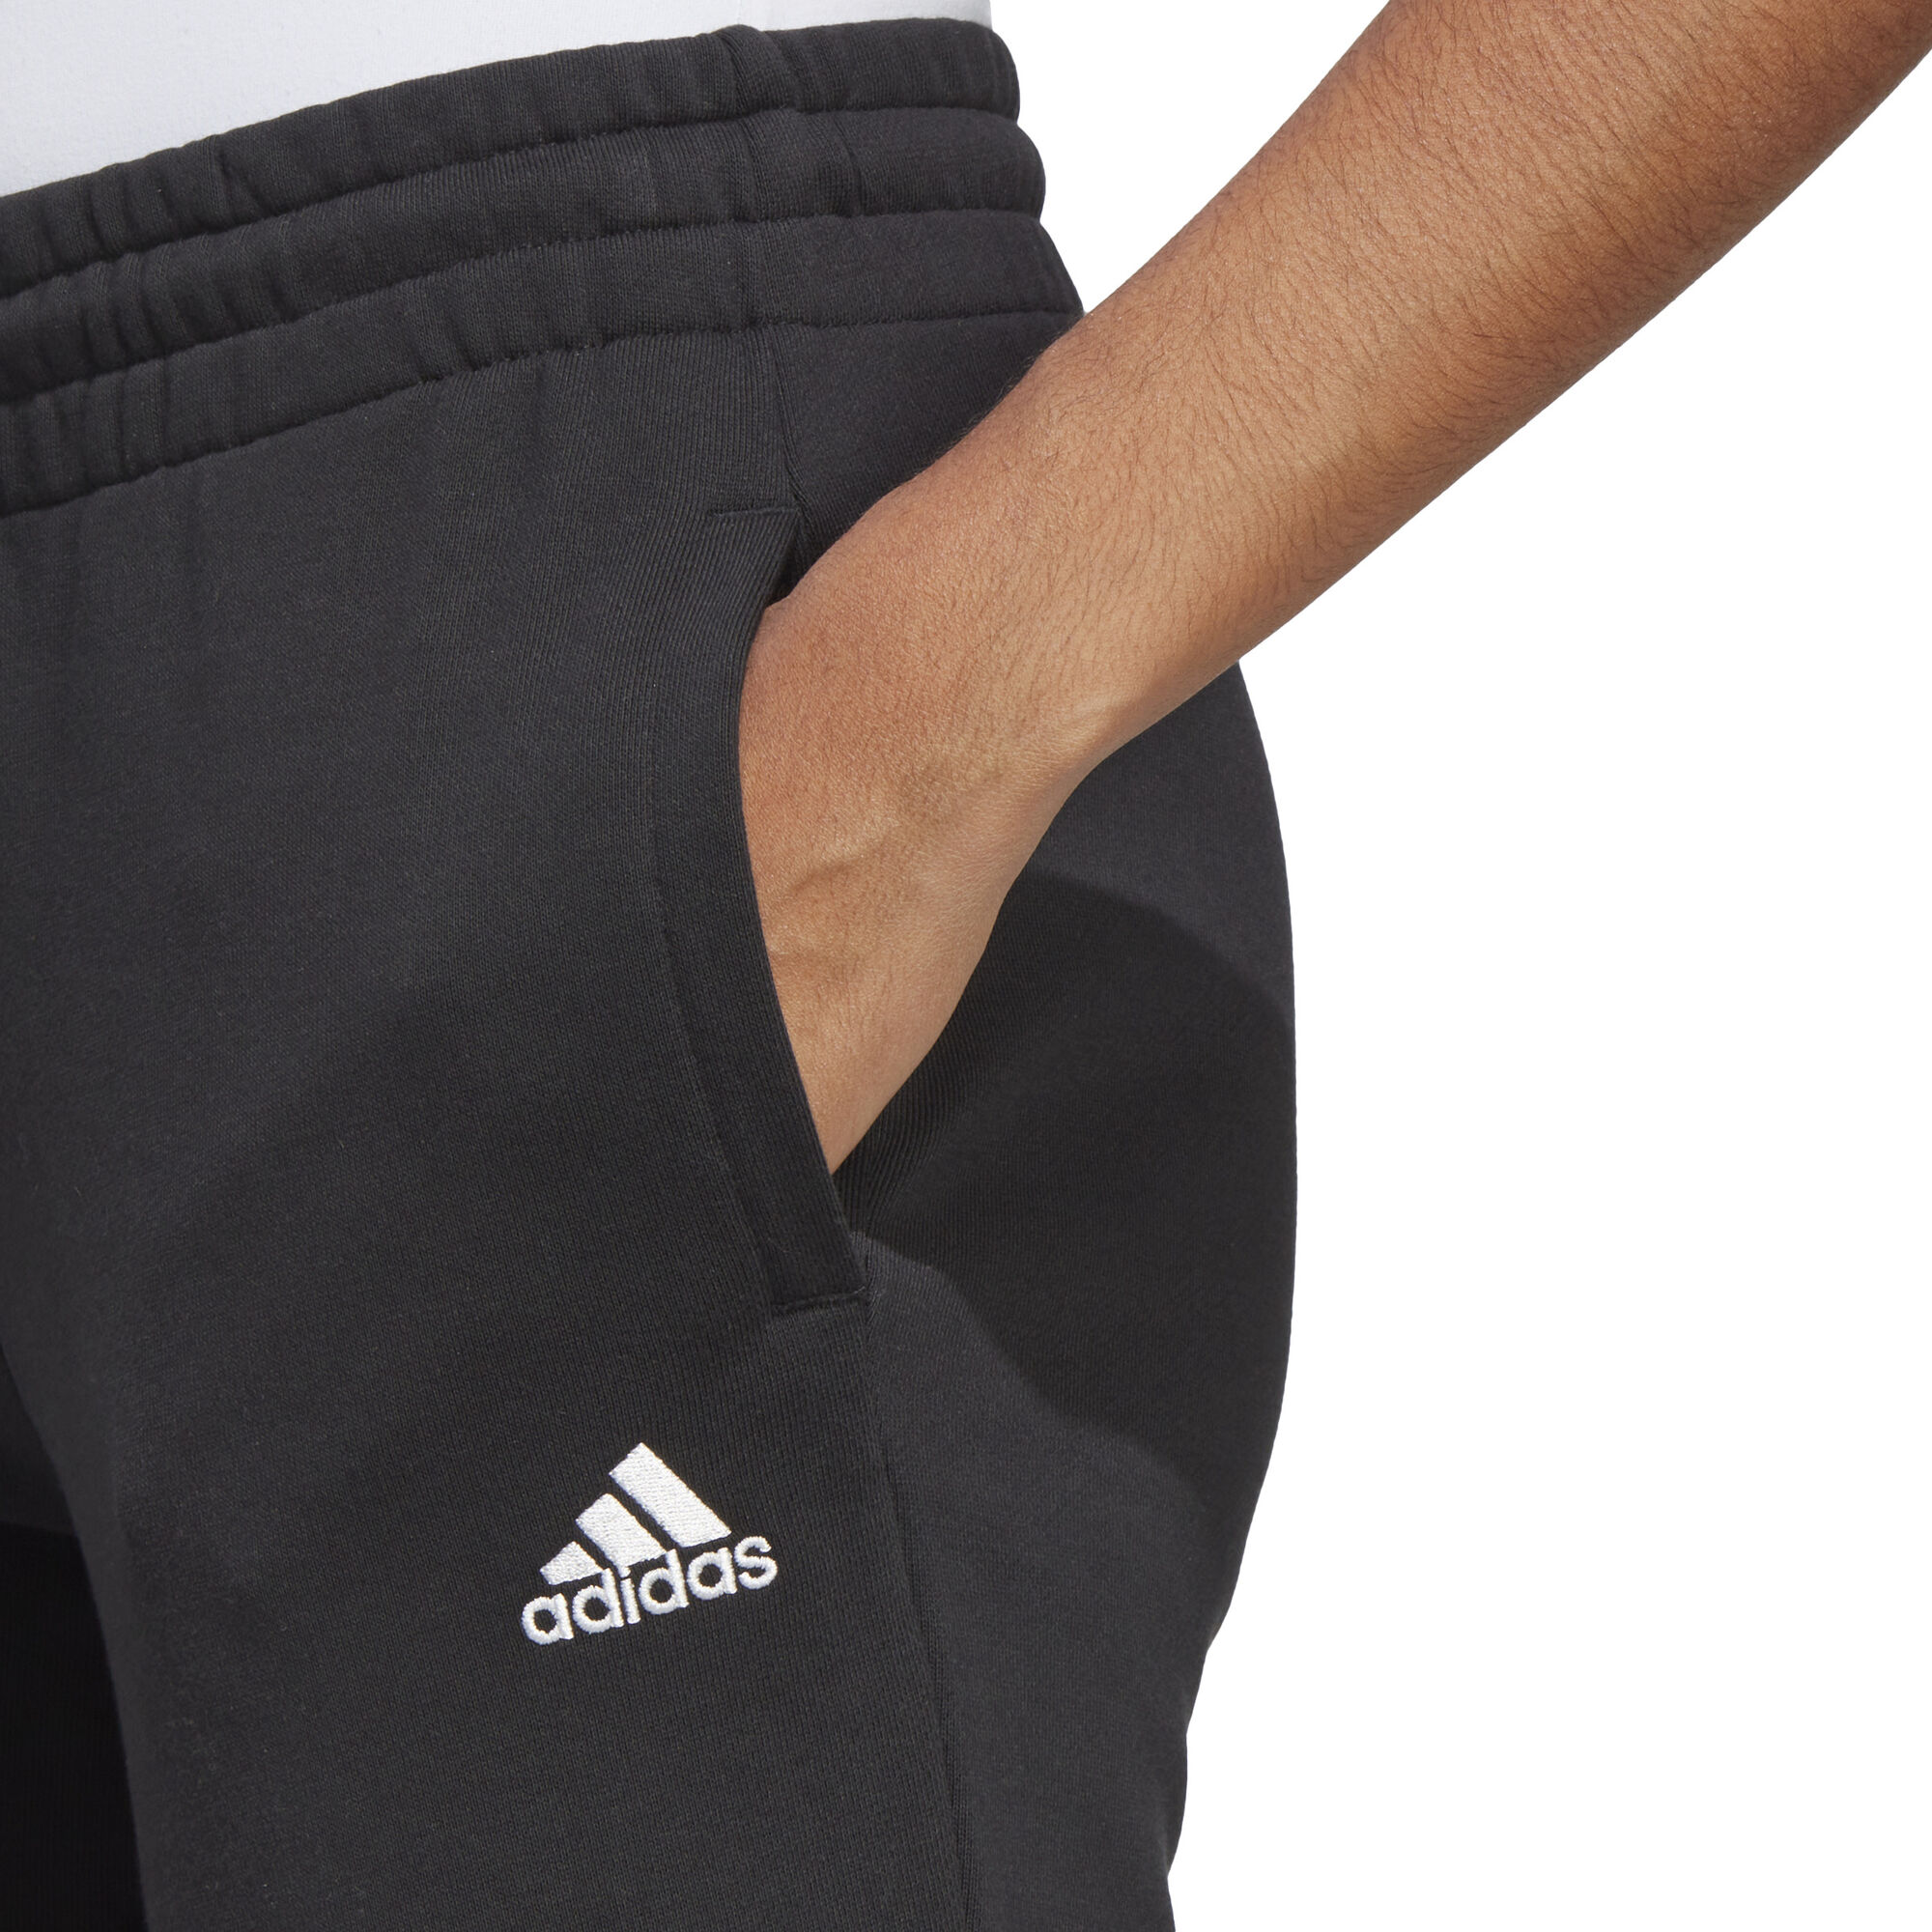 adidas Essentials Linear French Terry Cuffed Pants - Pink | Women's  Lifestyle | adidas US